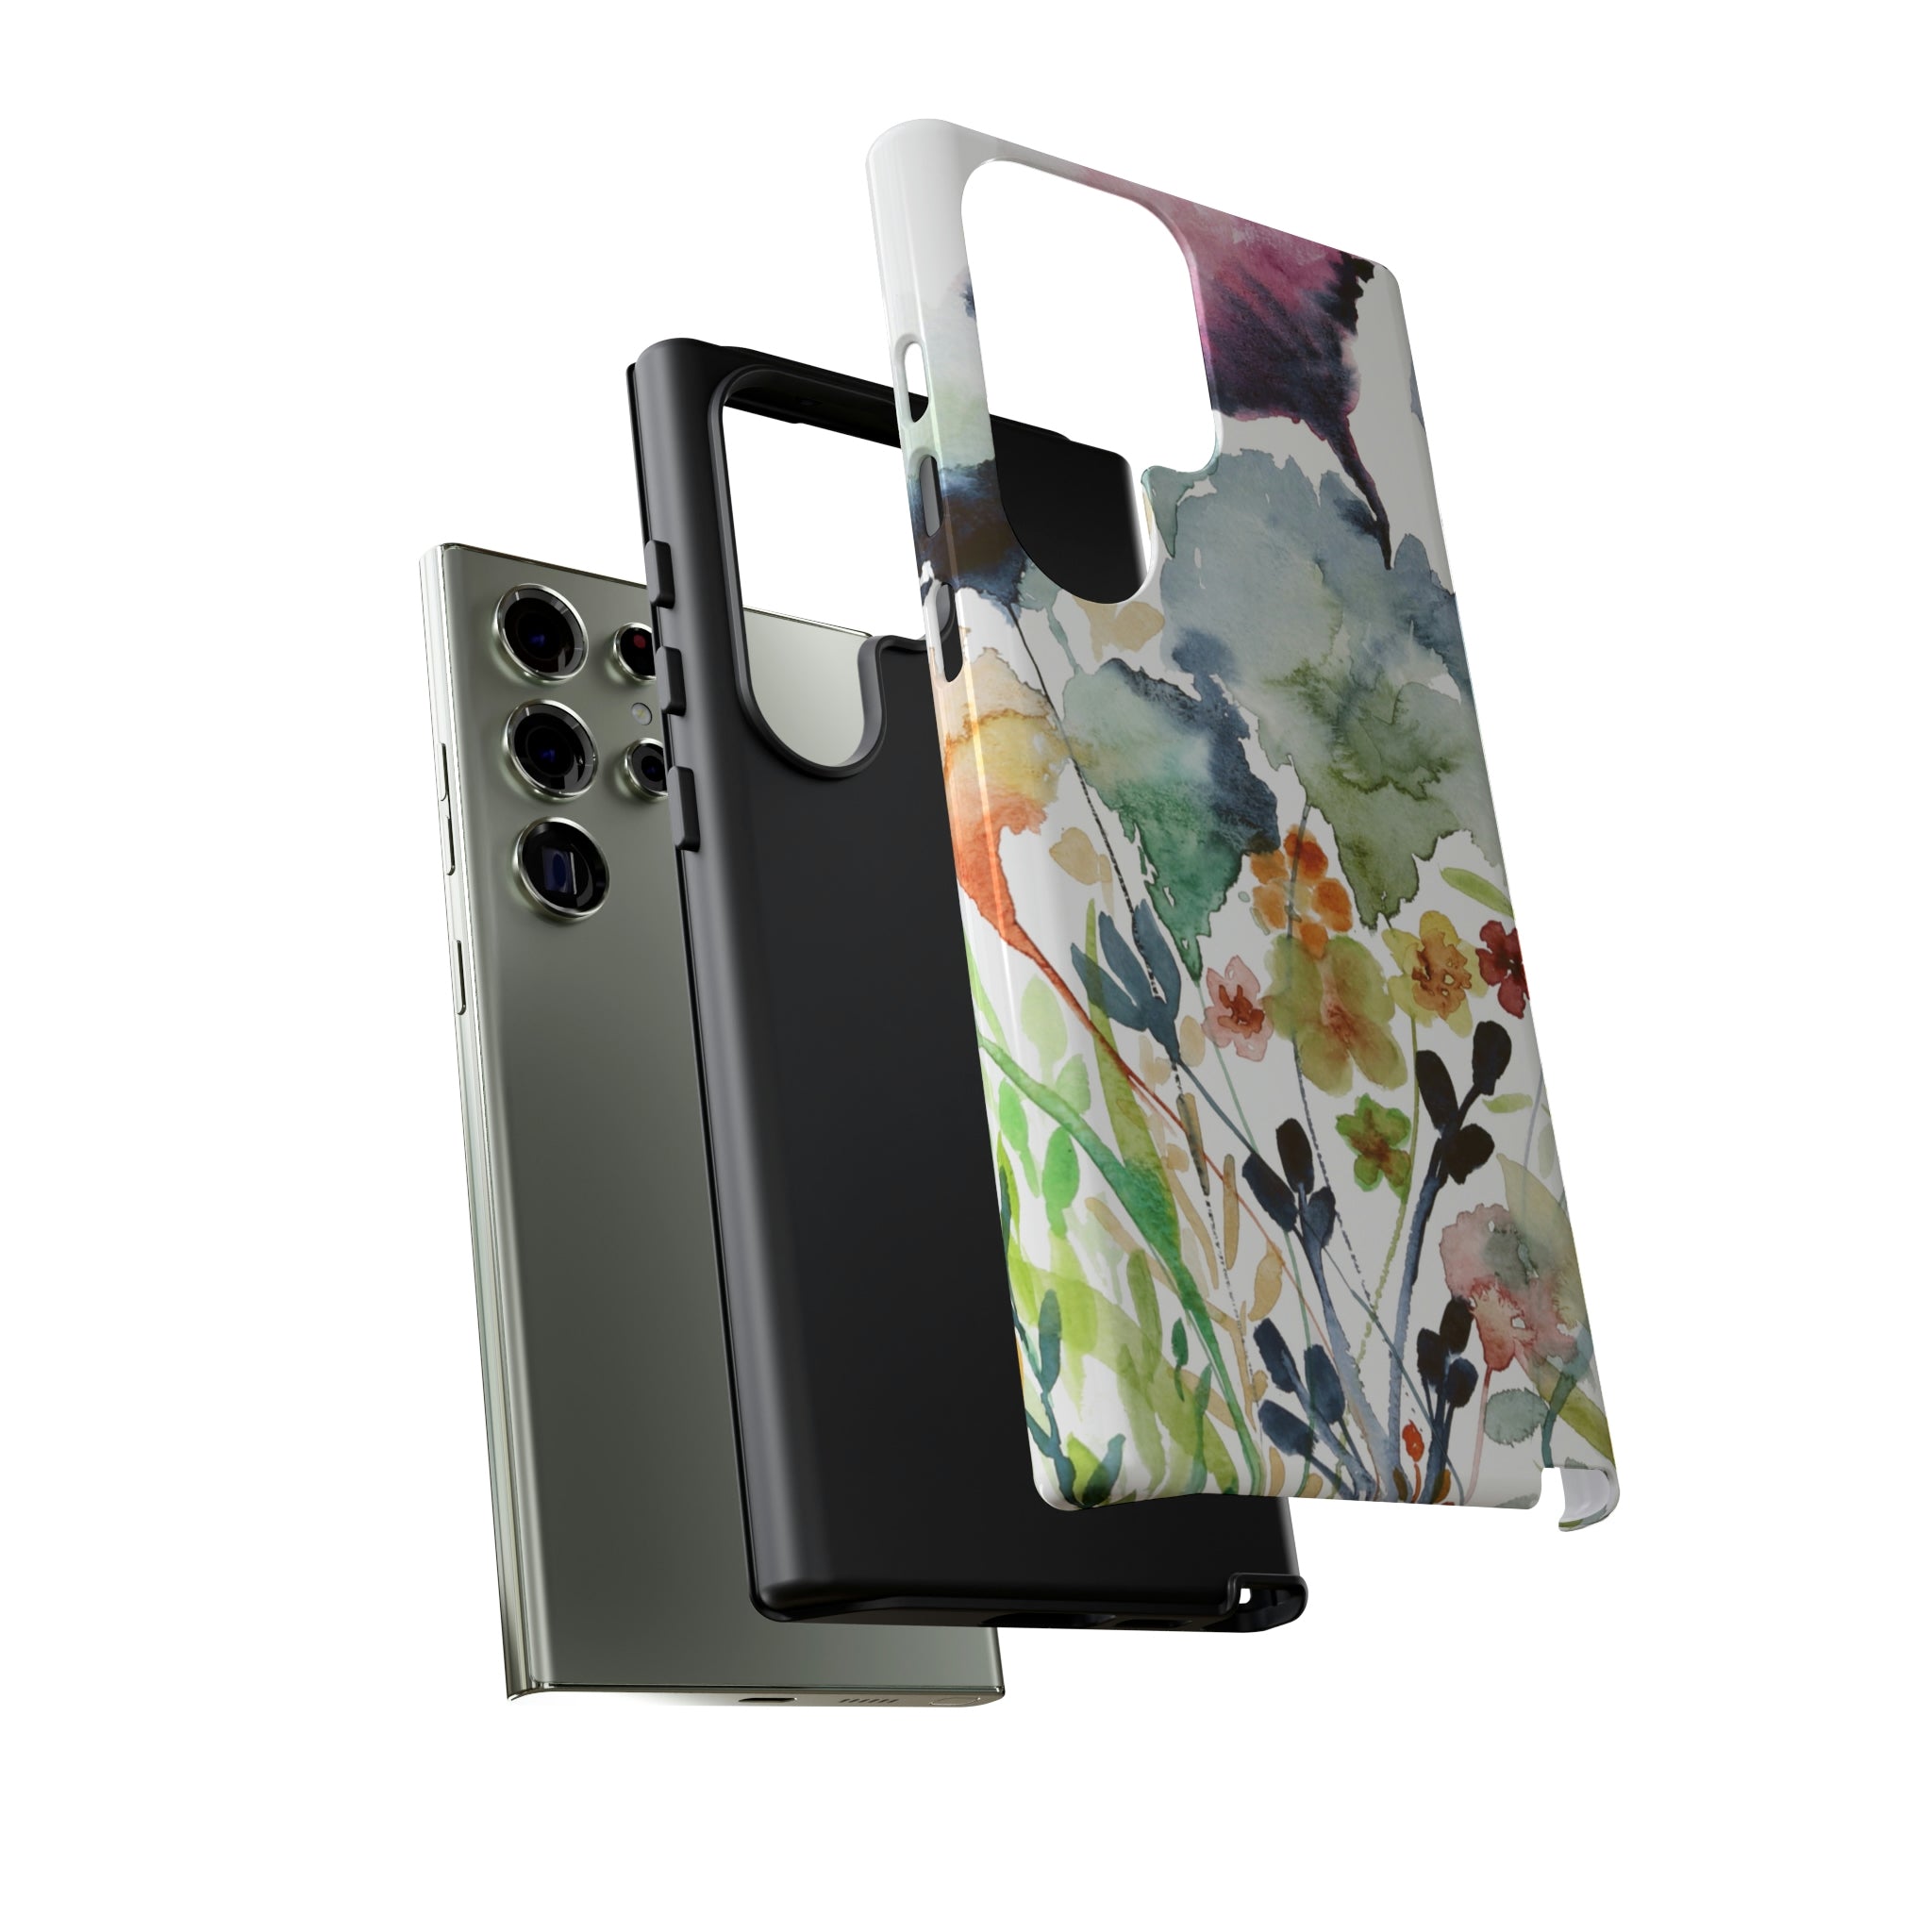 Wildflowers on Cell Phone Cases | Tough Cases